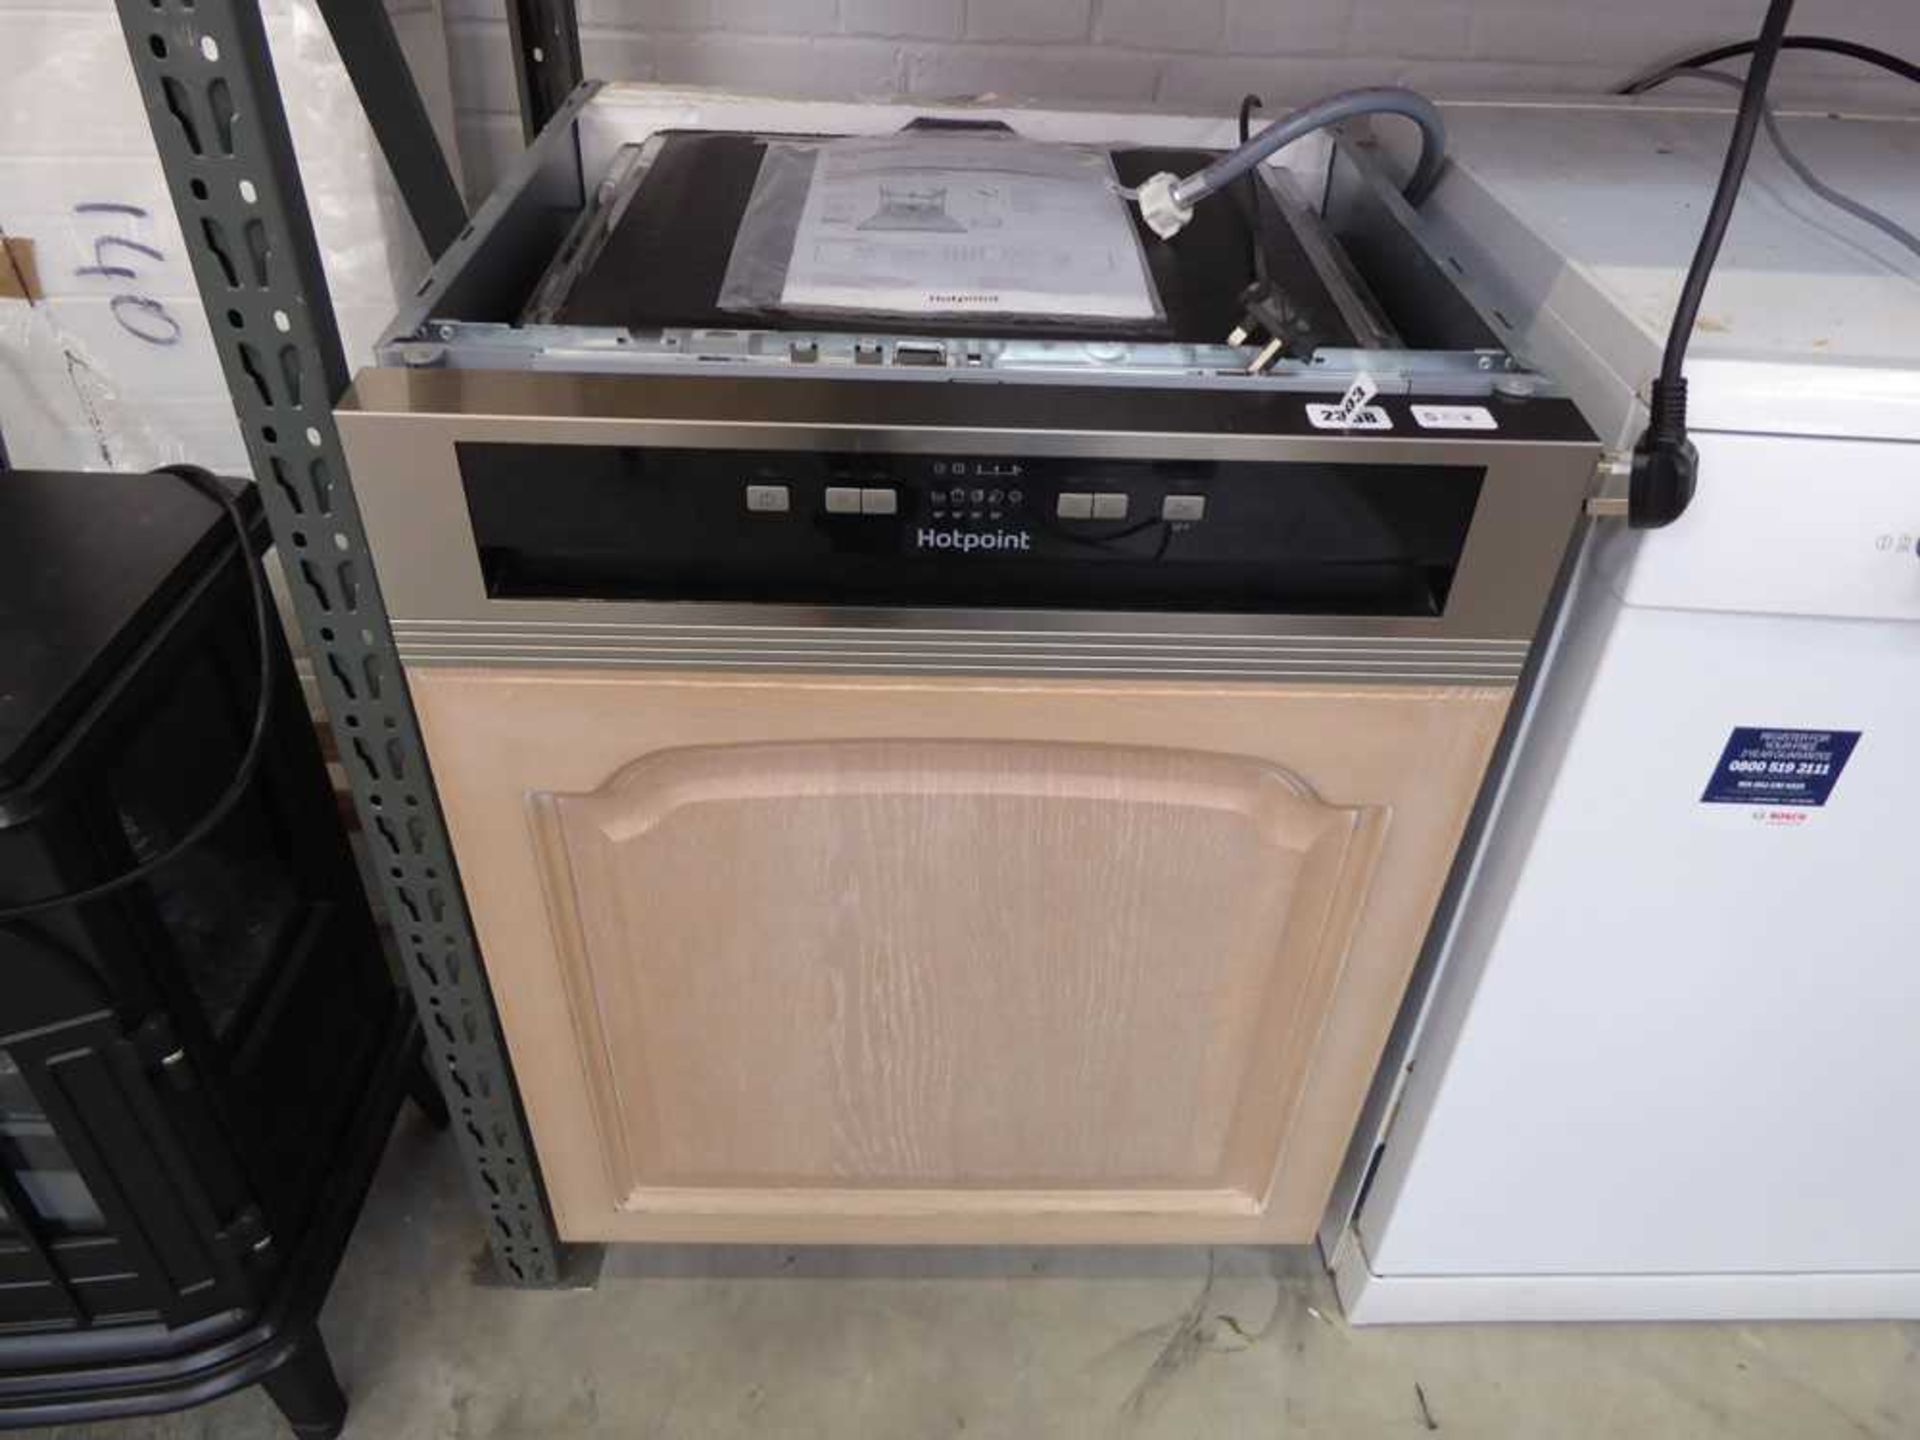 Hotpoint integrated dish washer